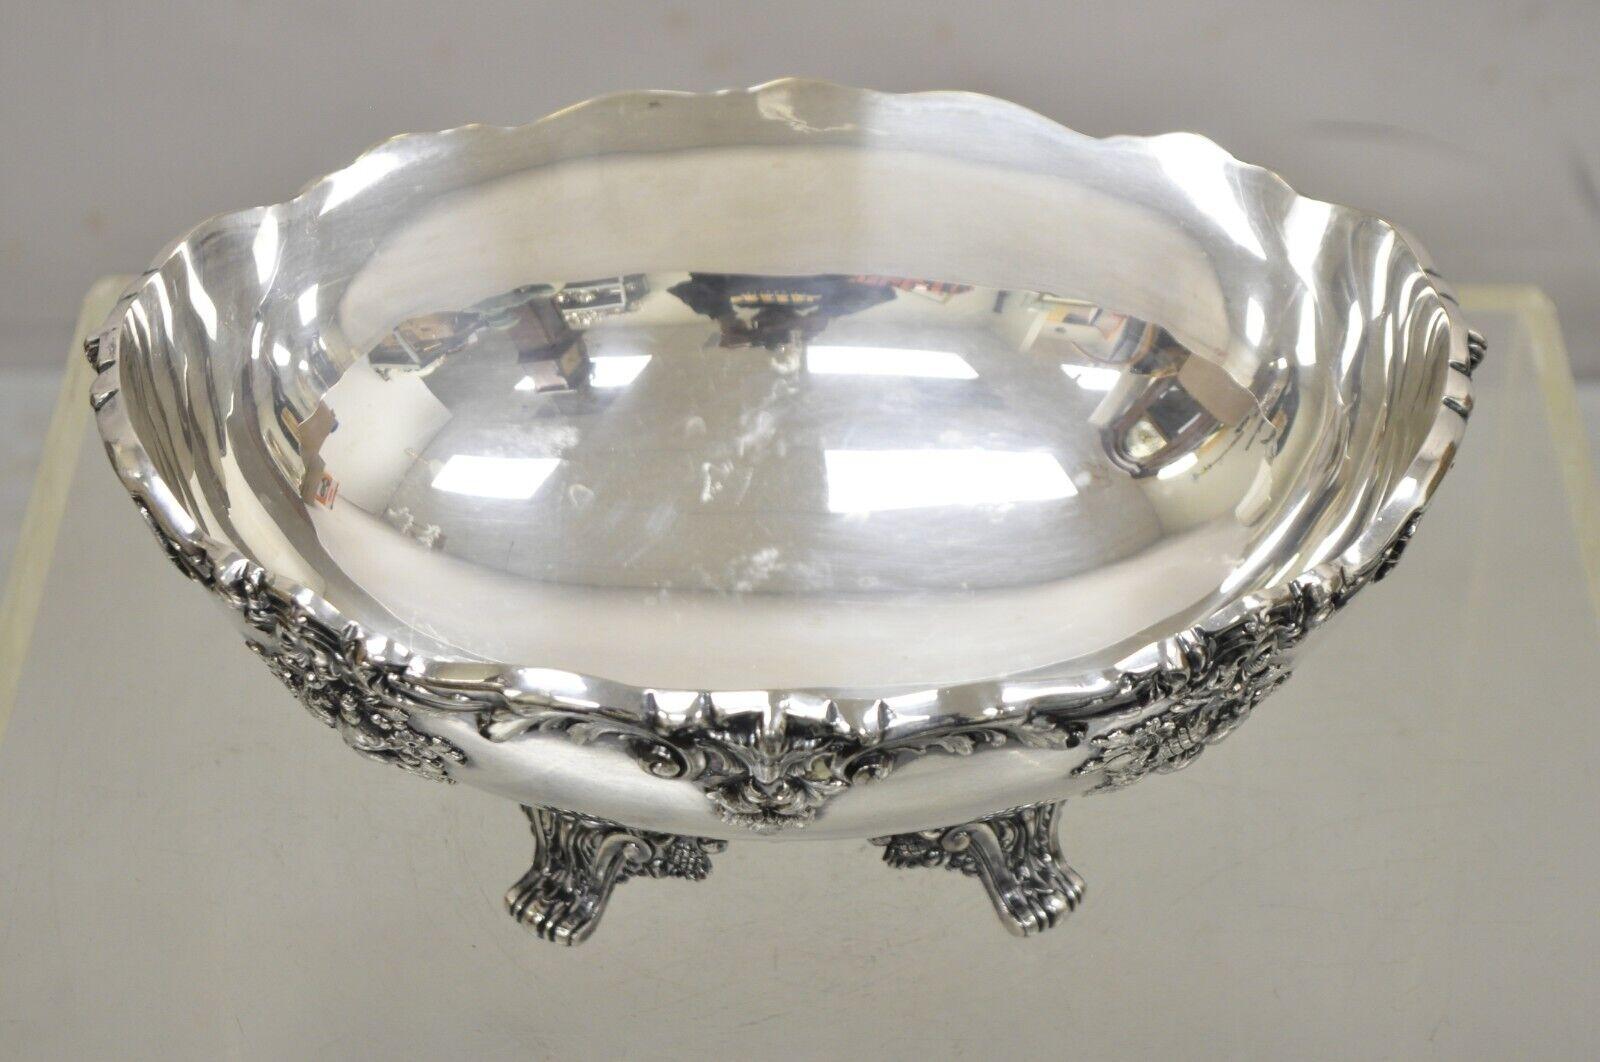 Reed & Barton King Francis 1684 Victorian Silver Plated Oval Footed Serving Bowl 2